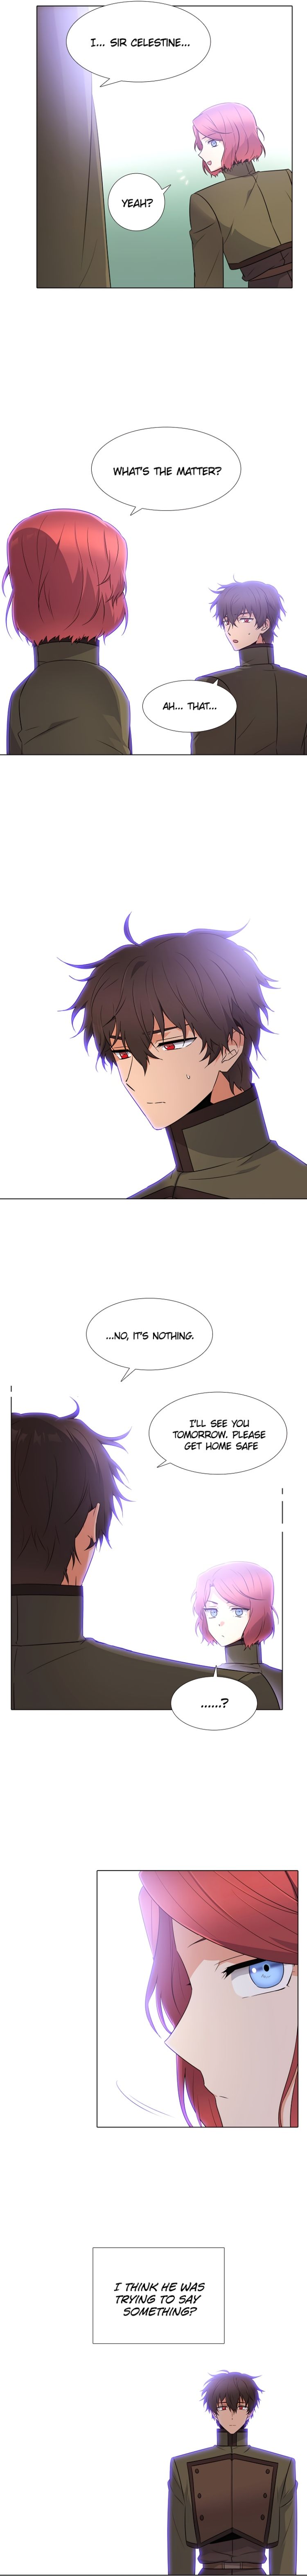 The Villain Discovered My Identity - Chapter 8 Page 11